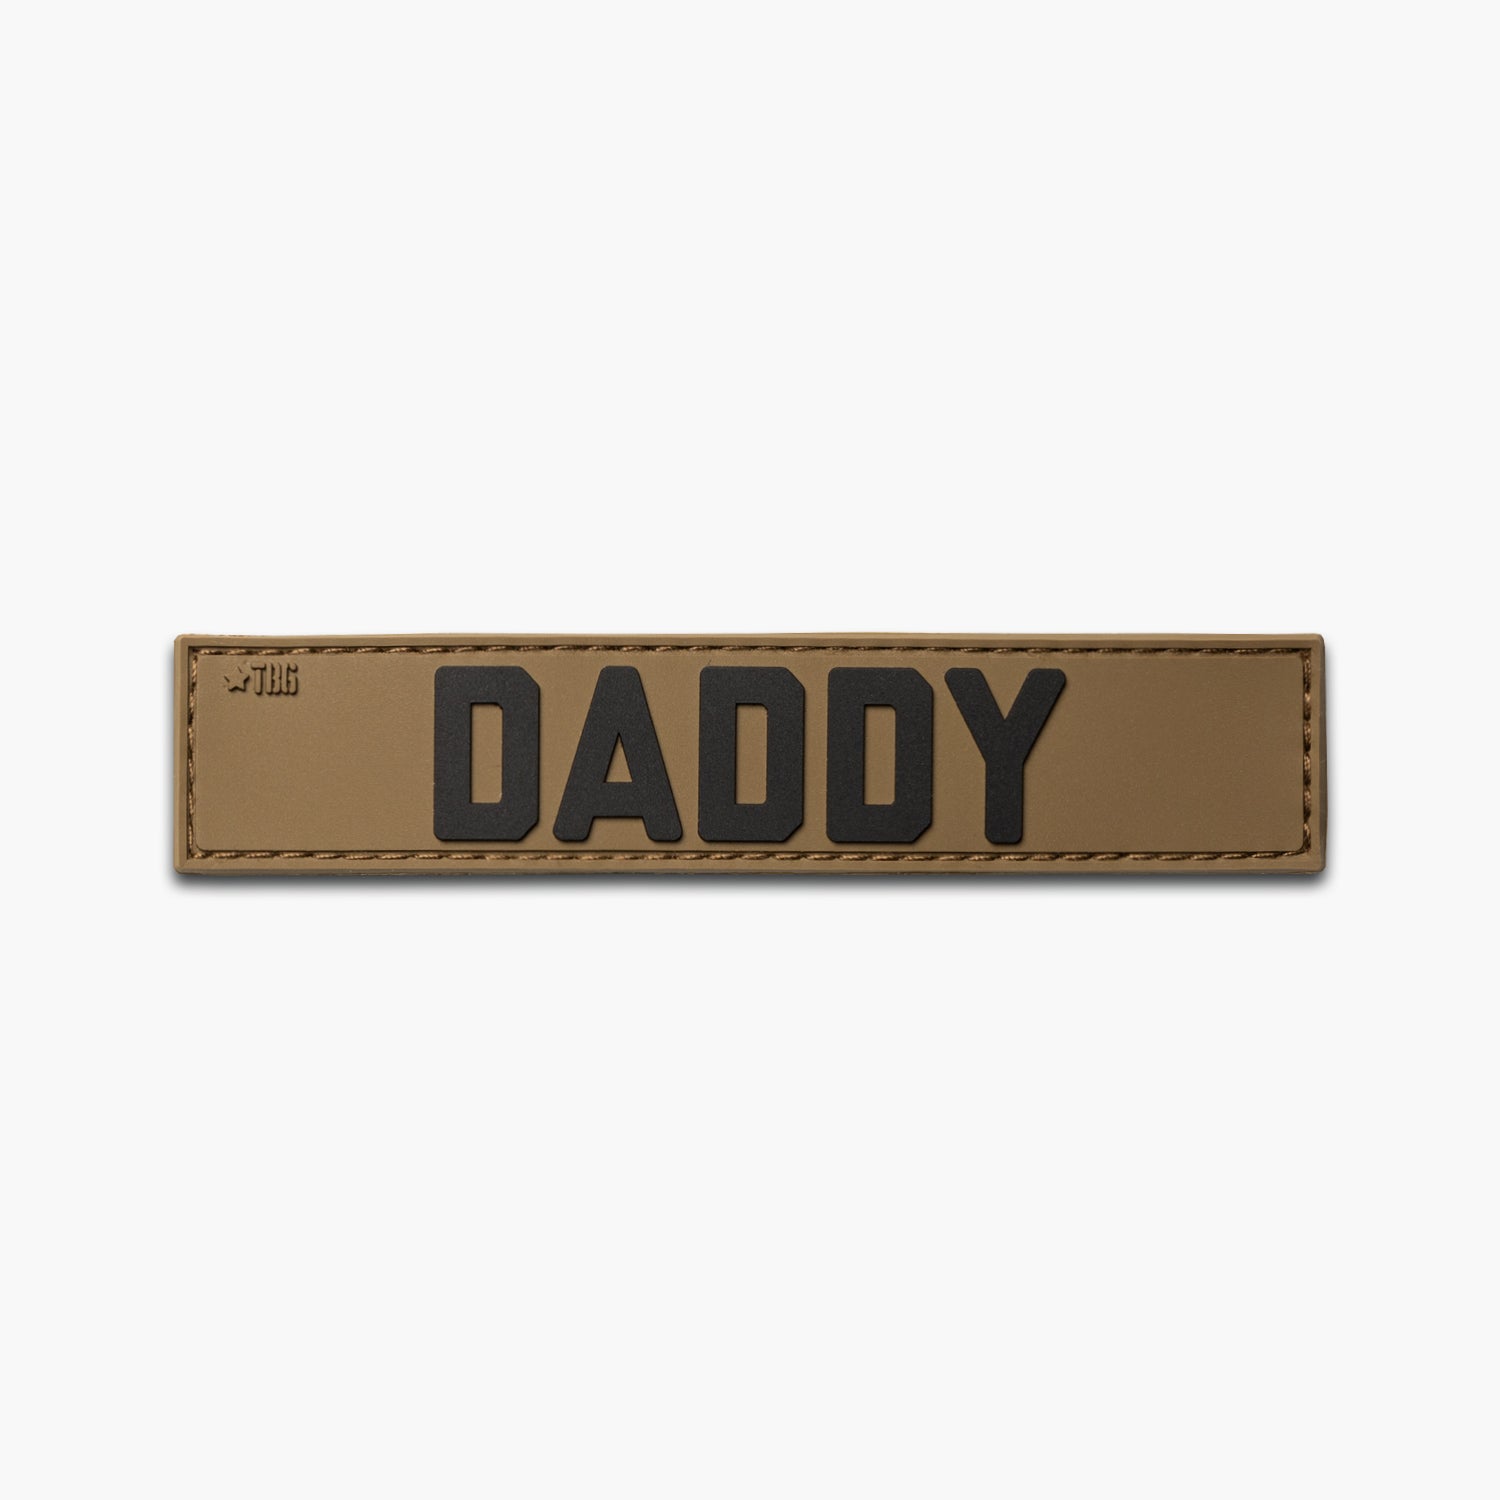 DADDY Name Tape Patch